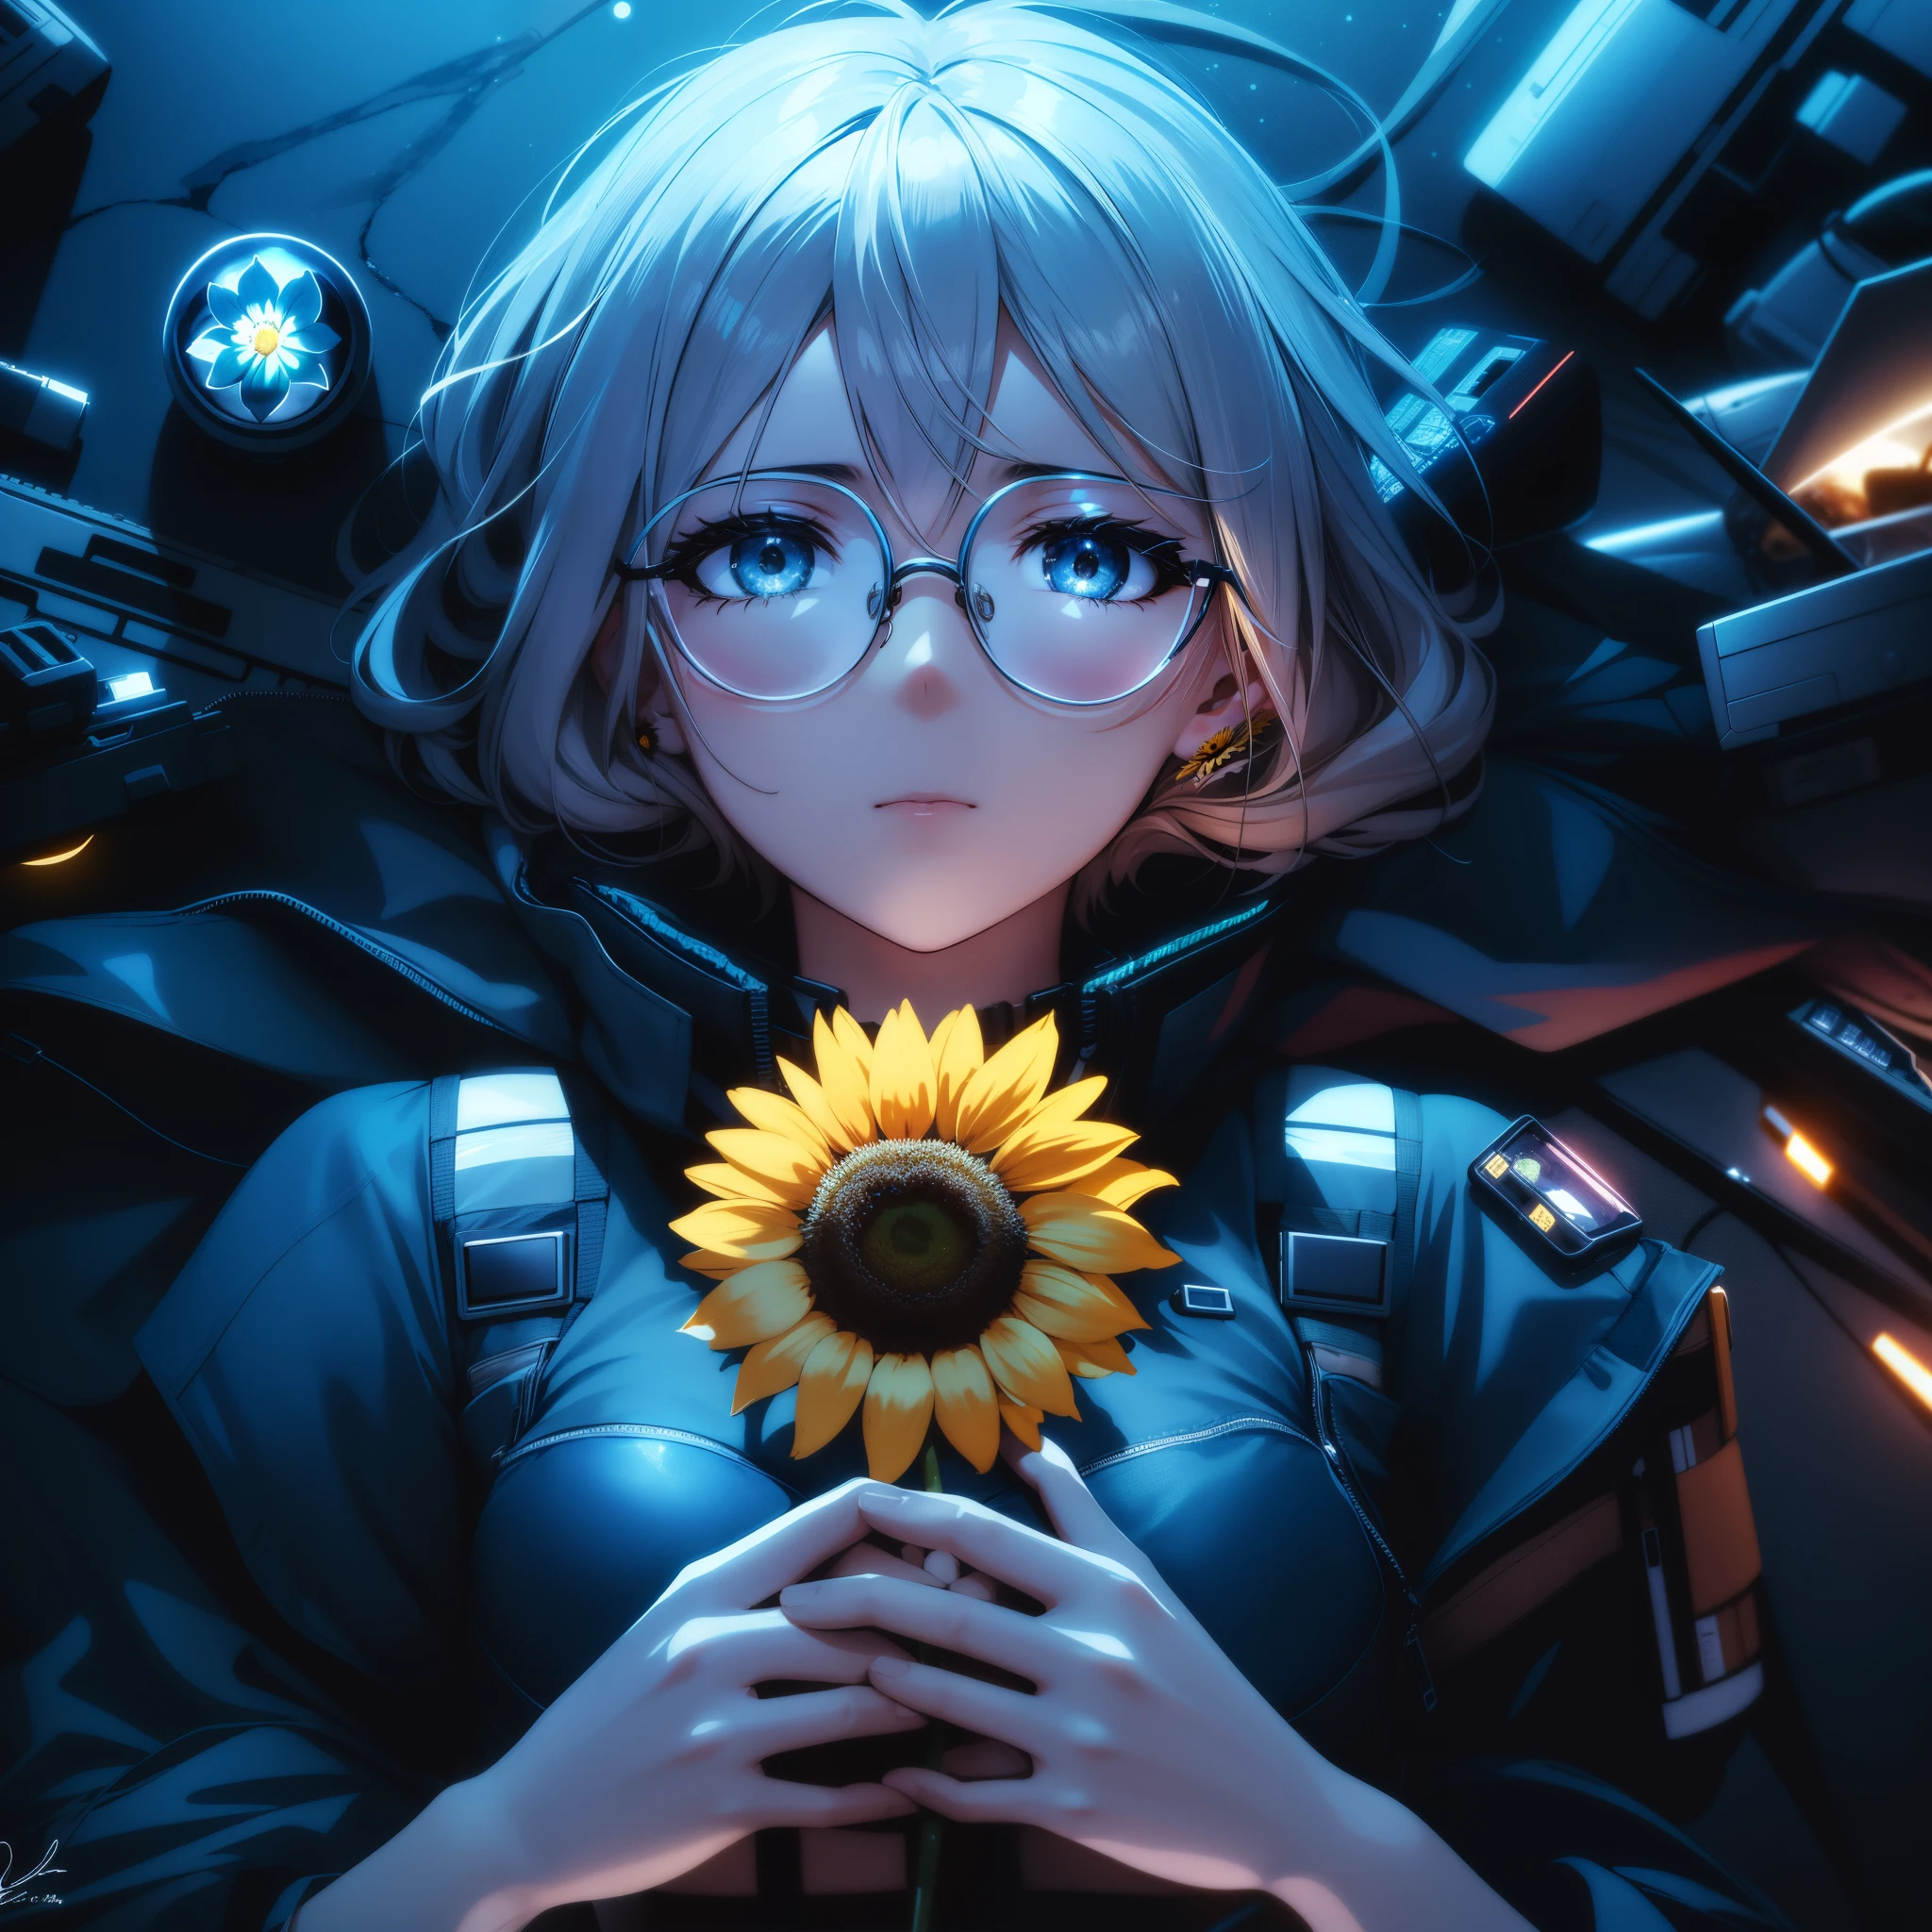  com olhos azuis, wearing round glasses, her blonde hair in side braids down and resting on her shoulders. She is in a completely destroyed cyberpunk environment, where nighttime stars are hidden by the incessant glow of futuristic vehicles and aircraft.. In her hand, she holds a lonely sunflower, forcibly removed by someone. Your look is neutral, slightly melancholy, mas profundamente contemplativo. In the chaotic and devastated scenario, a garota se destaca contra a beleza natural perdida. Os restos do girassol, once a radiant symbol of hope, now rest in your hands, ripped away by cruel hands. Seus olhos azuis refletem uma tristeza consciente pela perda, while round glasses add a touch of vulnerability to your expression. The absence of night stars is replaced by the artificial and frantic glow of vehicles and aircraft, encapsulando a atmosfera desolada e futurista. The Girl, deitado em meio a esta paisagem devastada, cradles the  sunflower with an expression that transcends sadness, conveying a profound reflection on the fragility of nature in a world corroded by technology and destruction. The scene is purposely centered on the presence of just one sunflower, emphasizing its singular meaning in your hands.